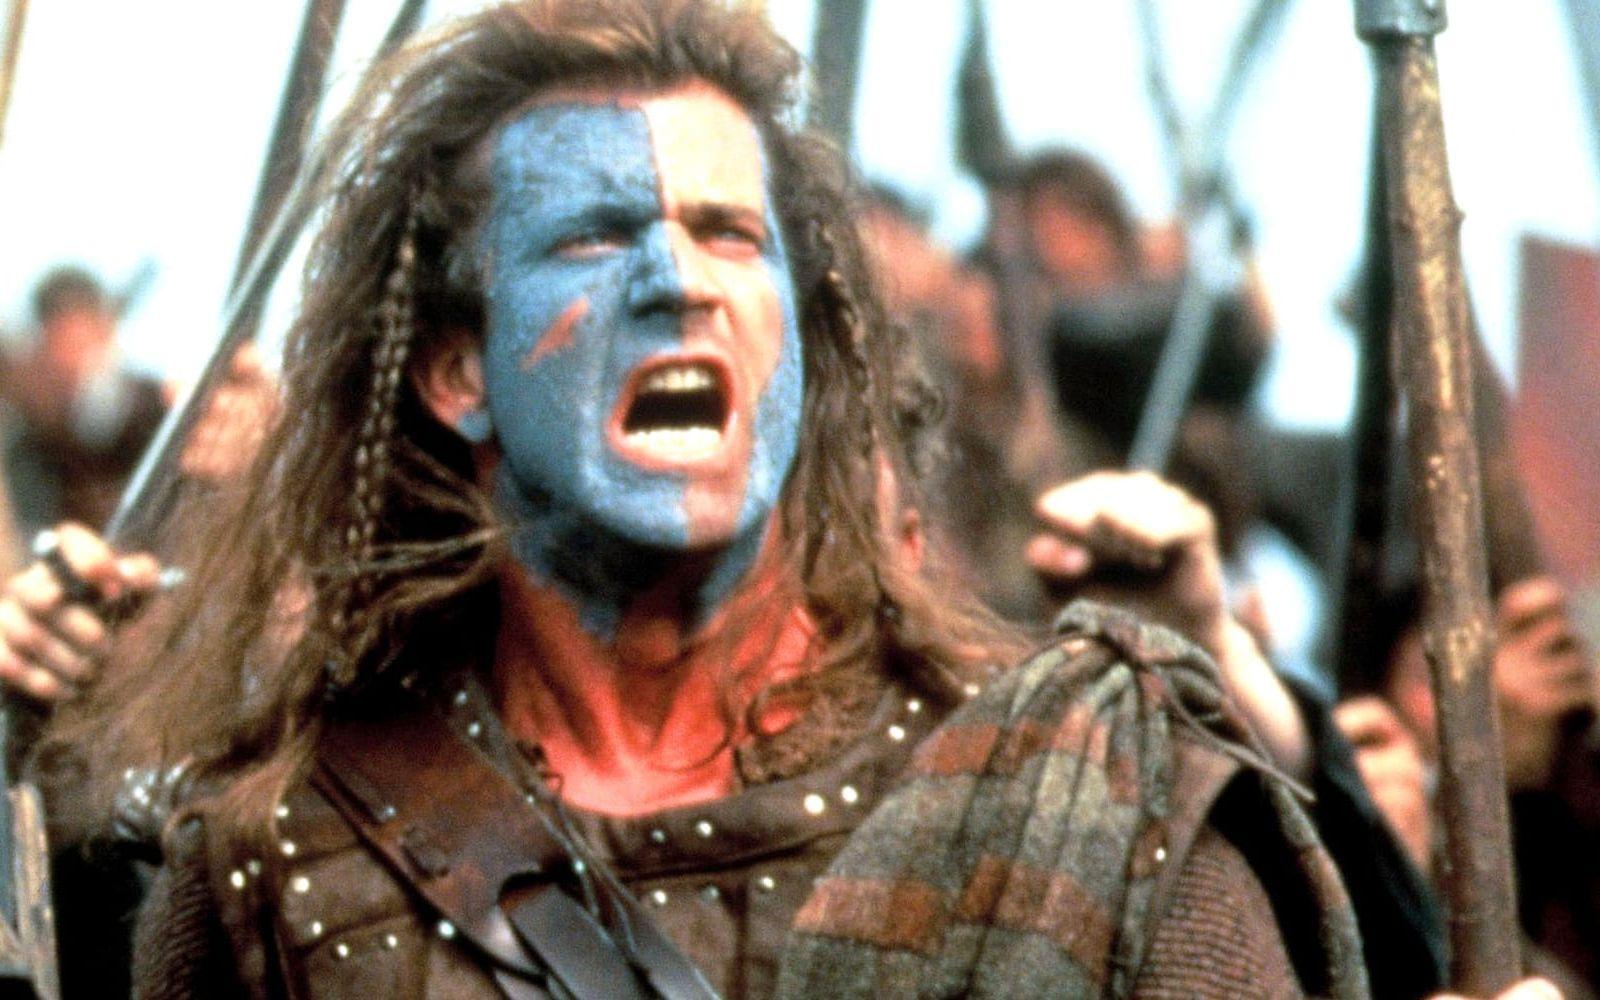 "They may take our lives, but they'll never take our freedom!" — Mel Gibson som William Wallace i Braveheart, 1995